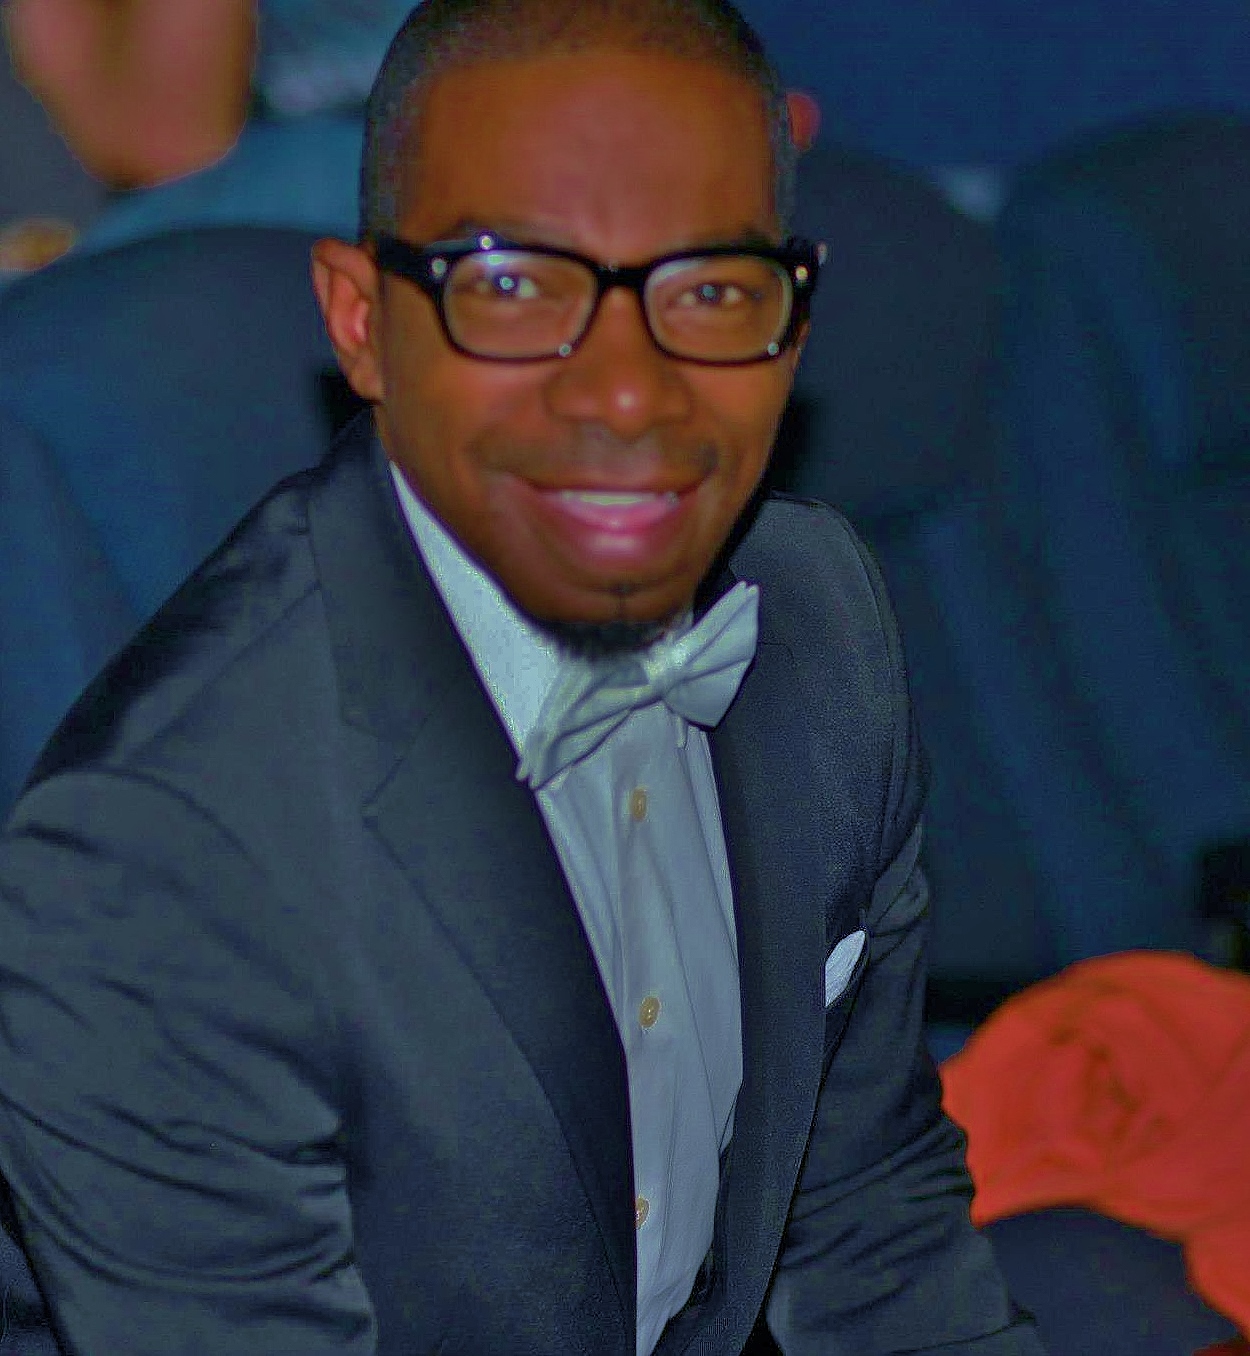 Actor Dwight Ewell at the premiere of the film 'The Skinny' at The Egyptian Theatre in Hollywood.